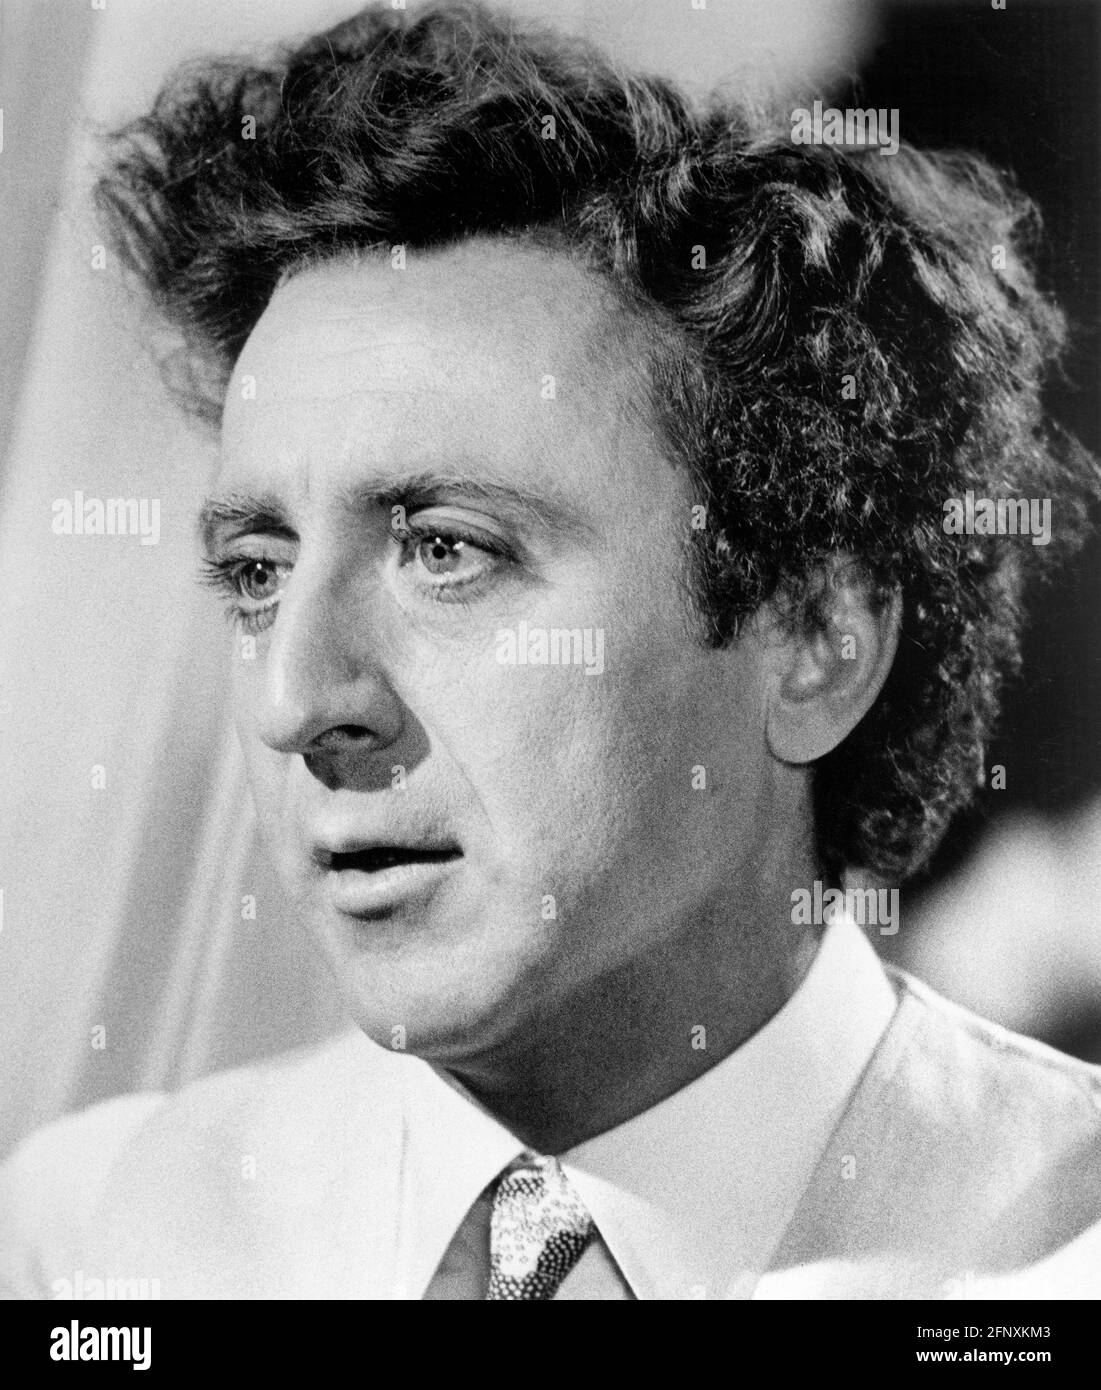 Gene Wilder, Head and Shoulders Publicity Portrait for the Film, 'The World's Greatest Lover', 20th Century-Fox, 1977 Stockfoto